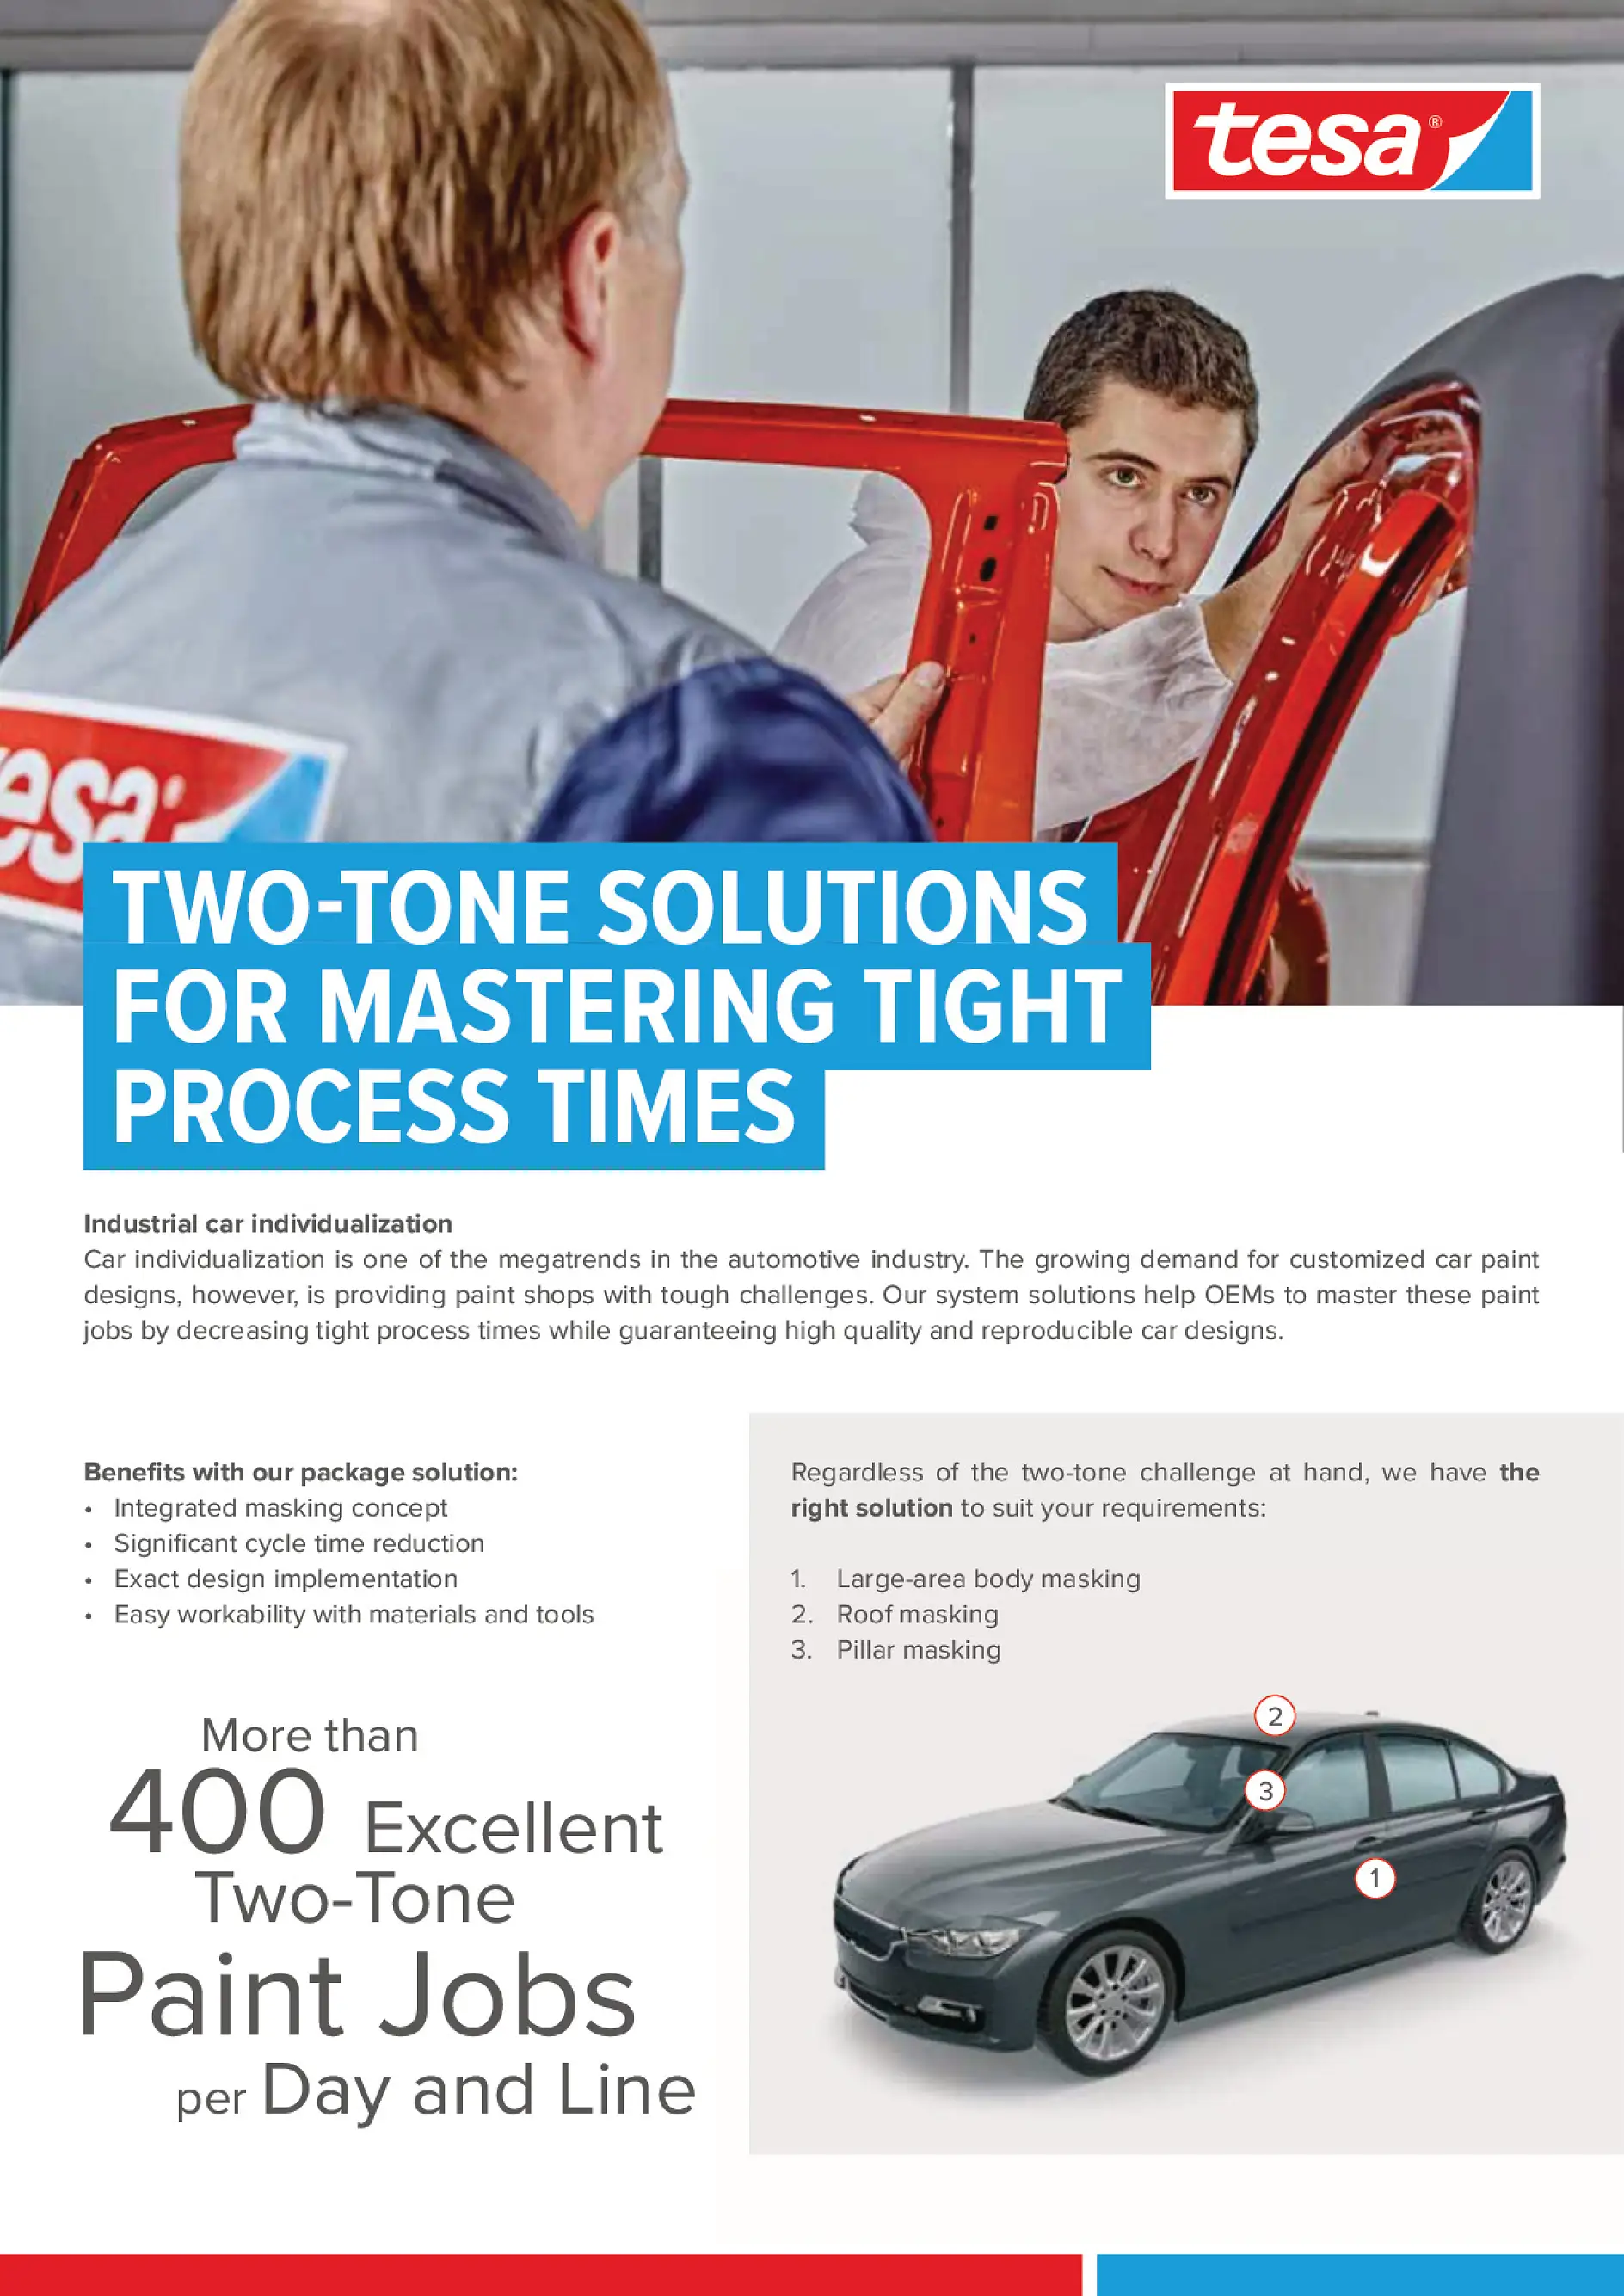 Two-Tone Solutions for Mastering Tight Process Times